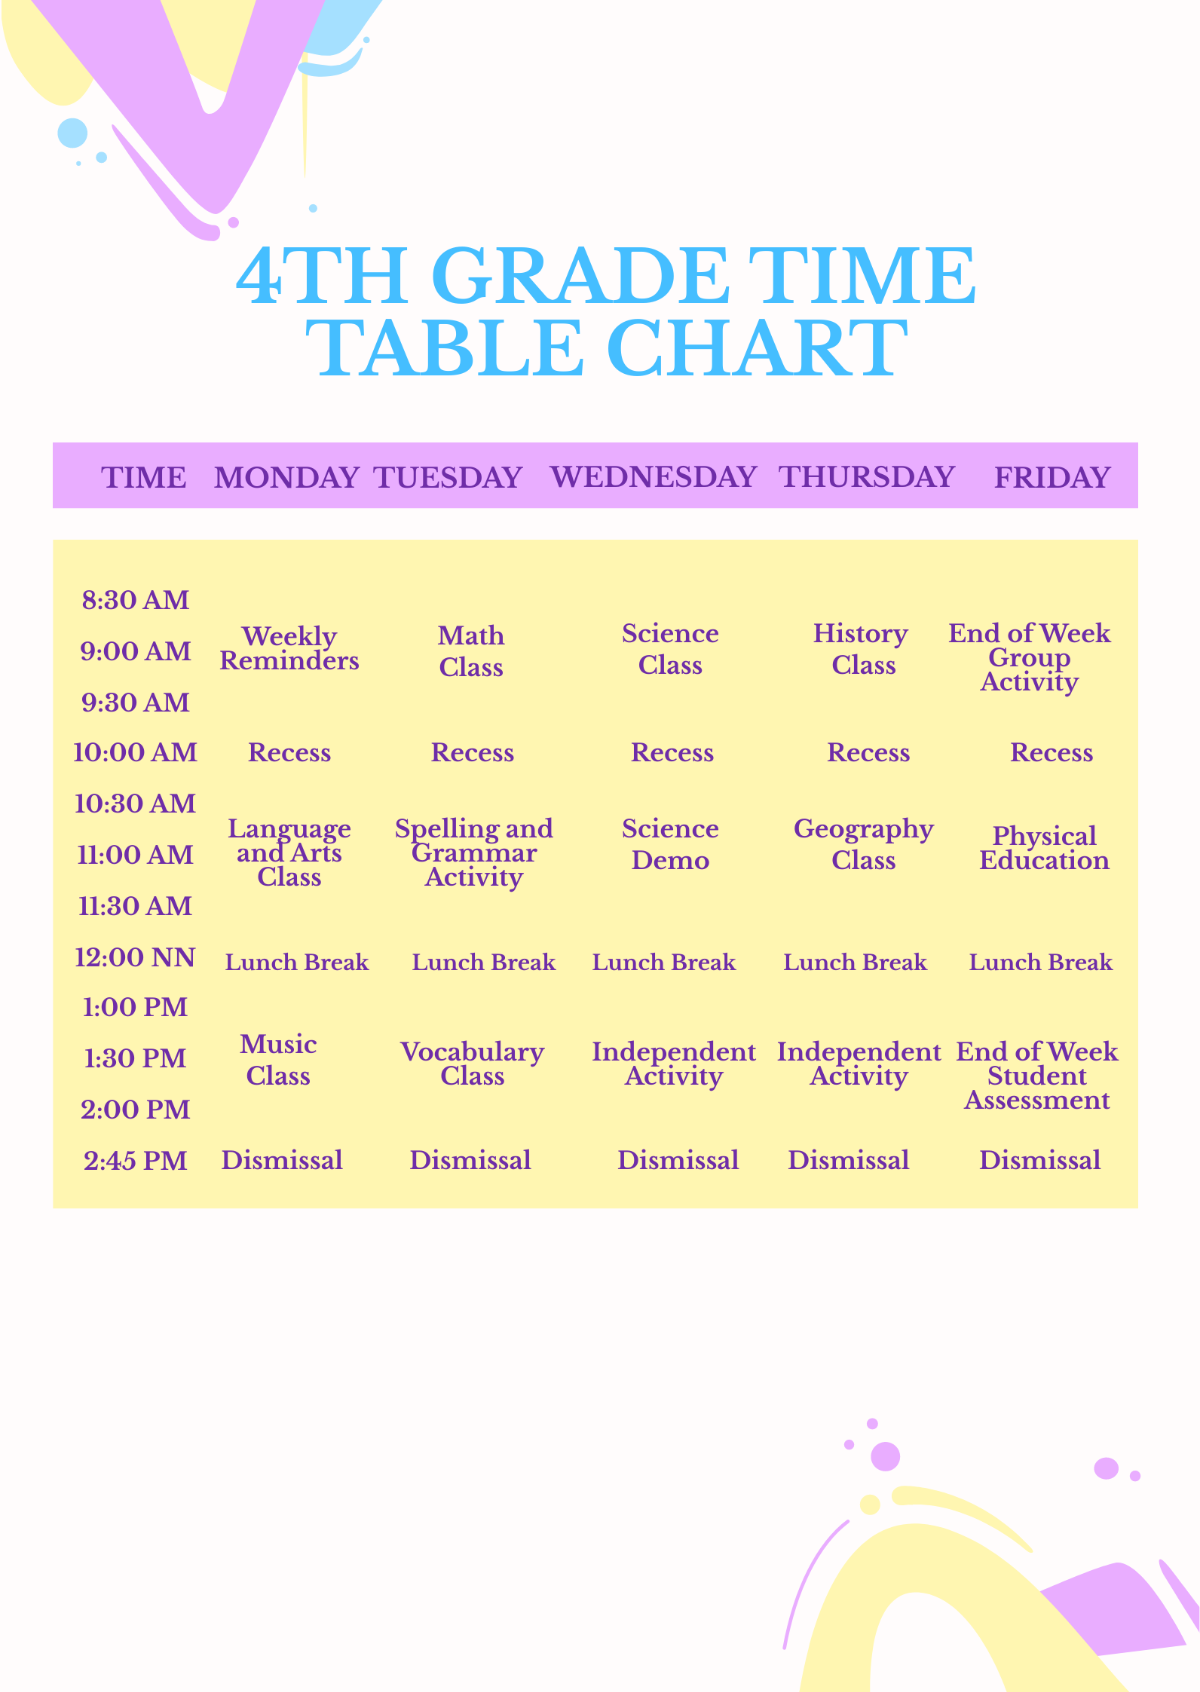 4th Grade Time Table Chart Template